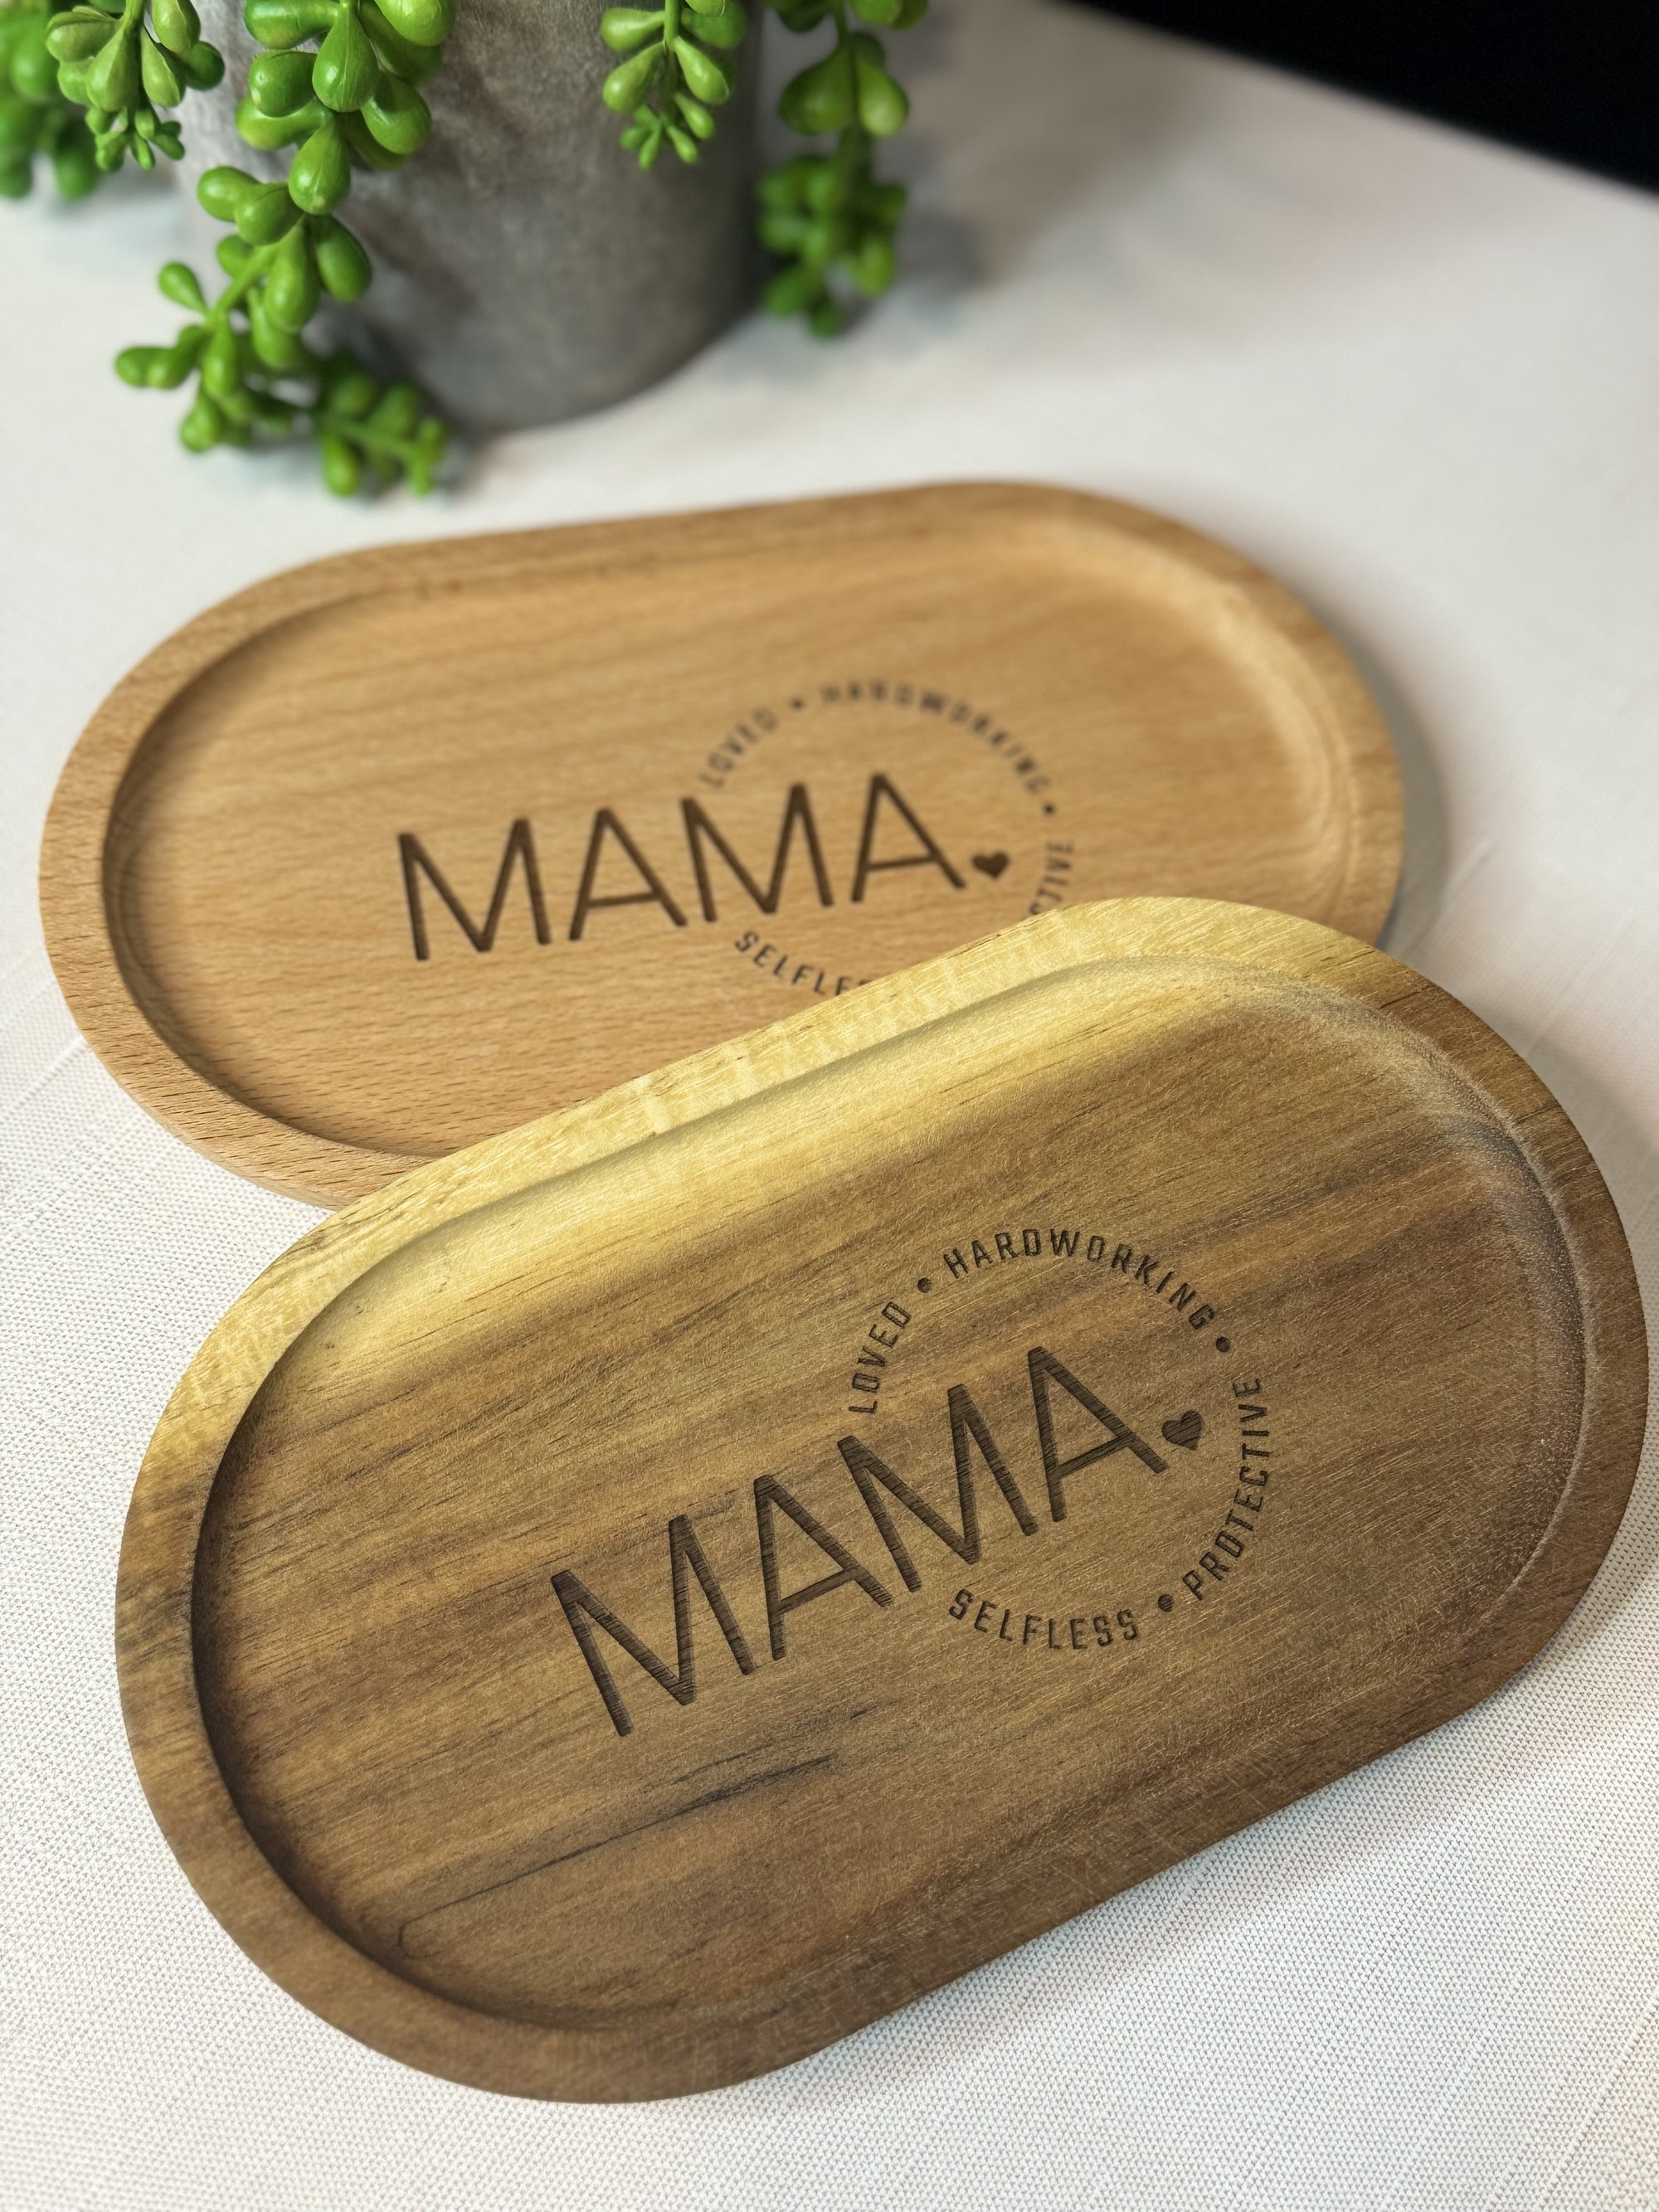 Wooden Oval Trays